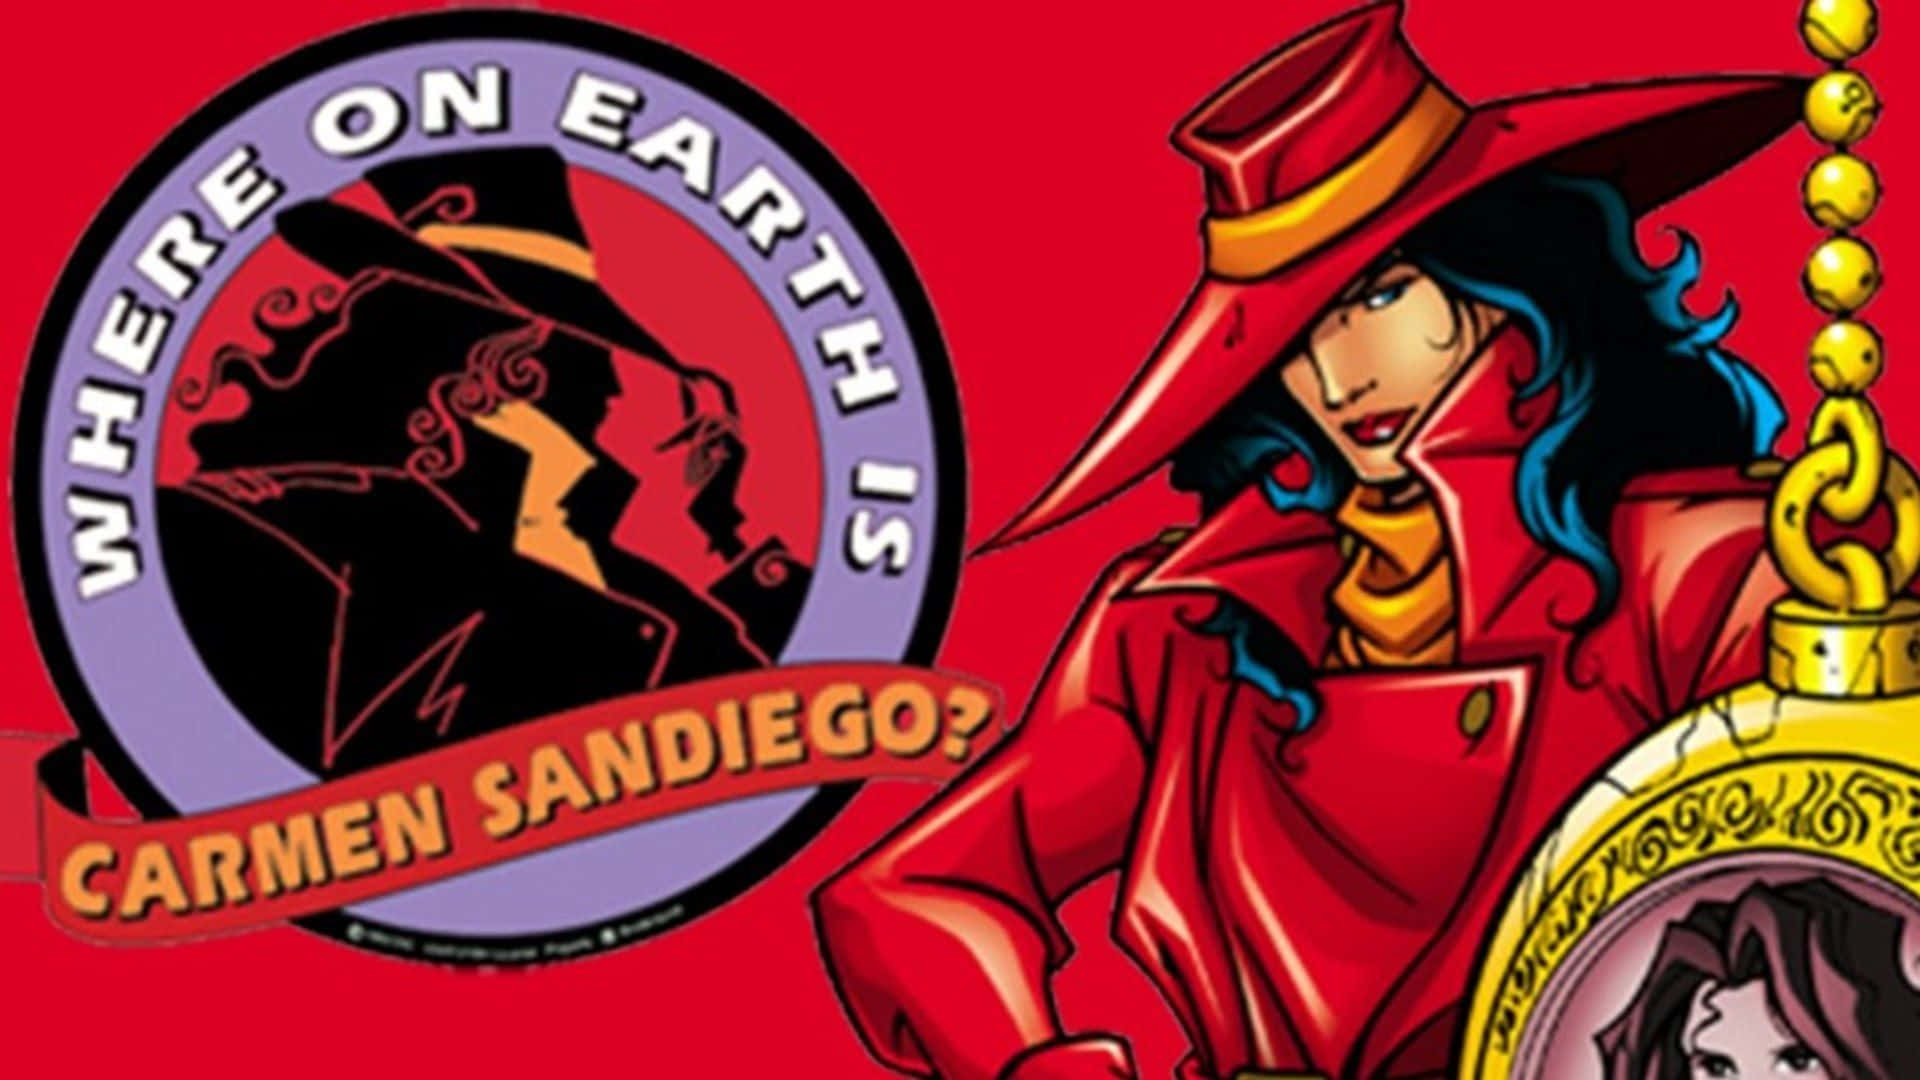 "Where In the World Is Carmen Sandiego" Wallpaper